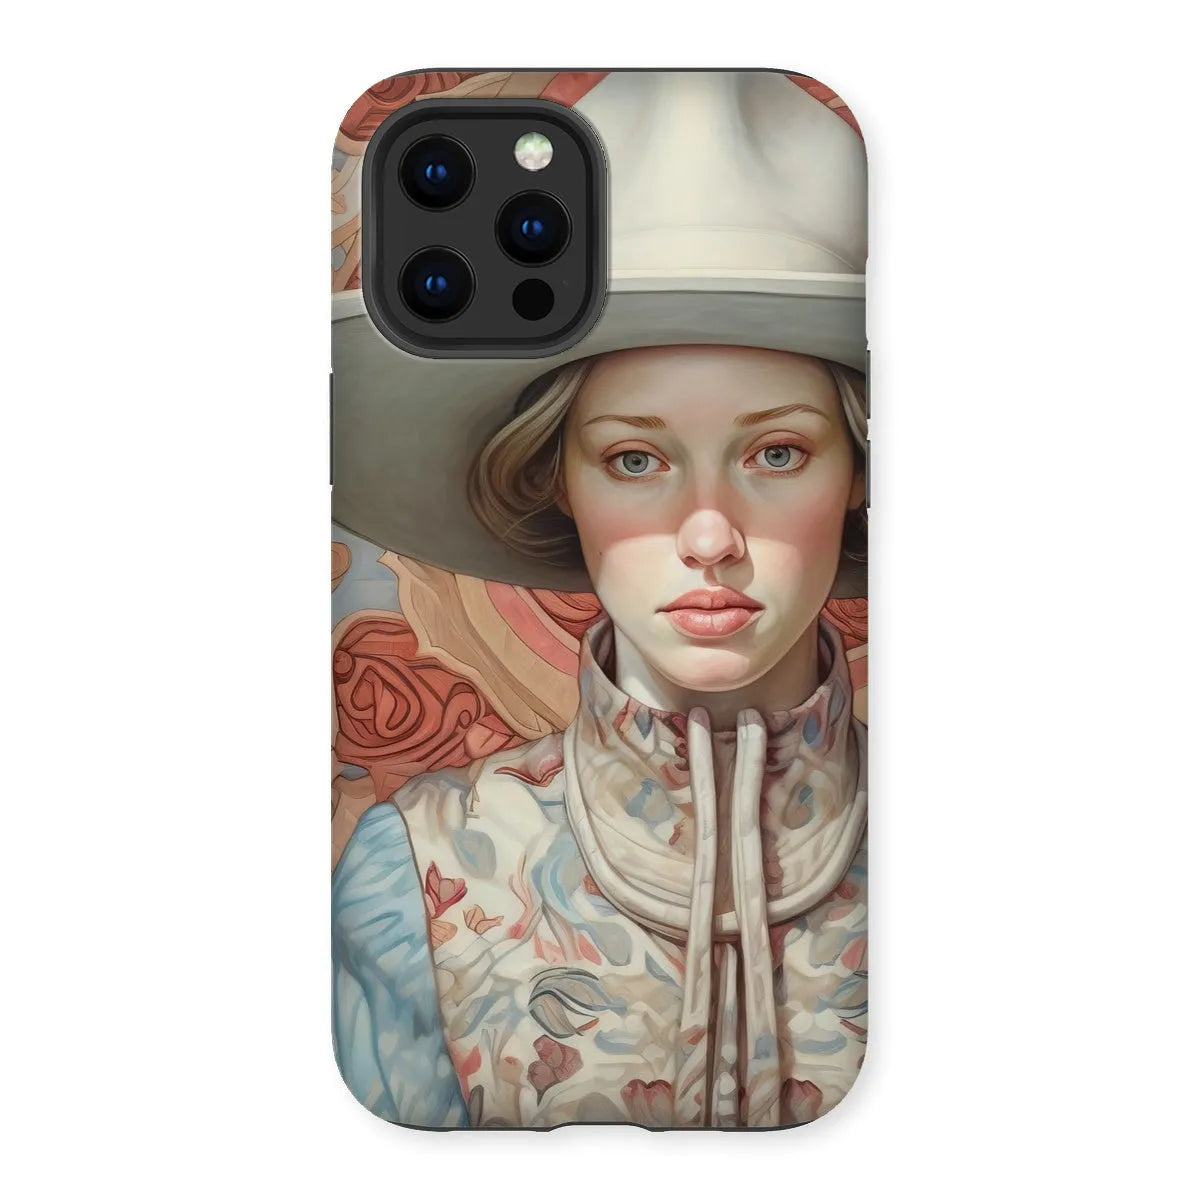 Lottie The Lesbian Cowgirl - Sapphic Art Phone Case - Iphone 13 Pro Max / Matte - Mobile Phone Cases - Aesthetic Art